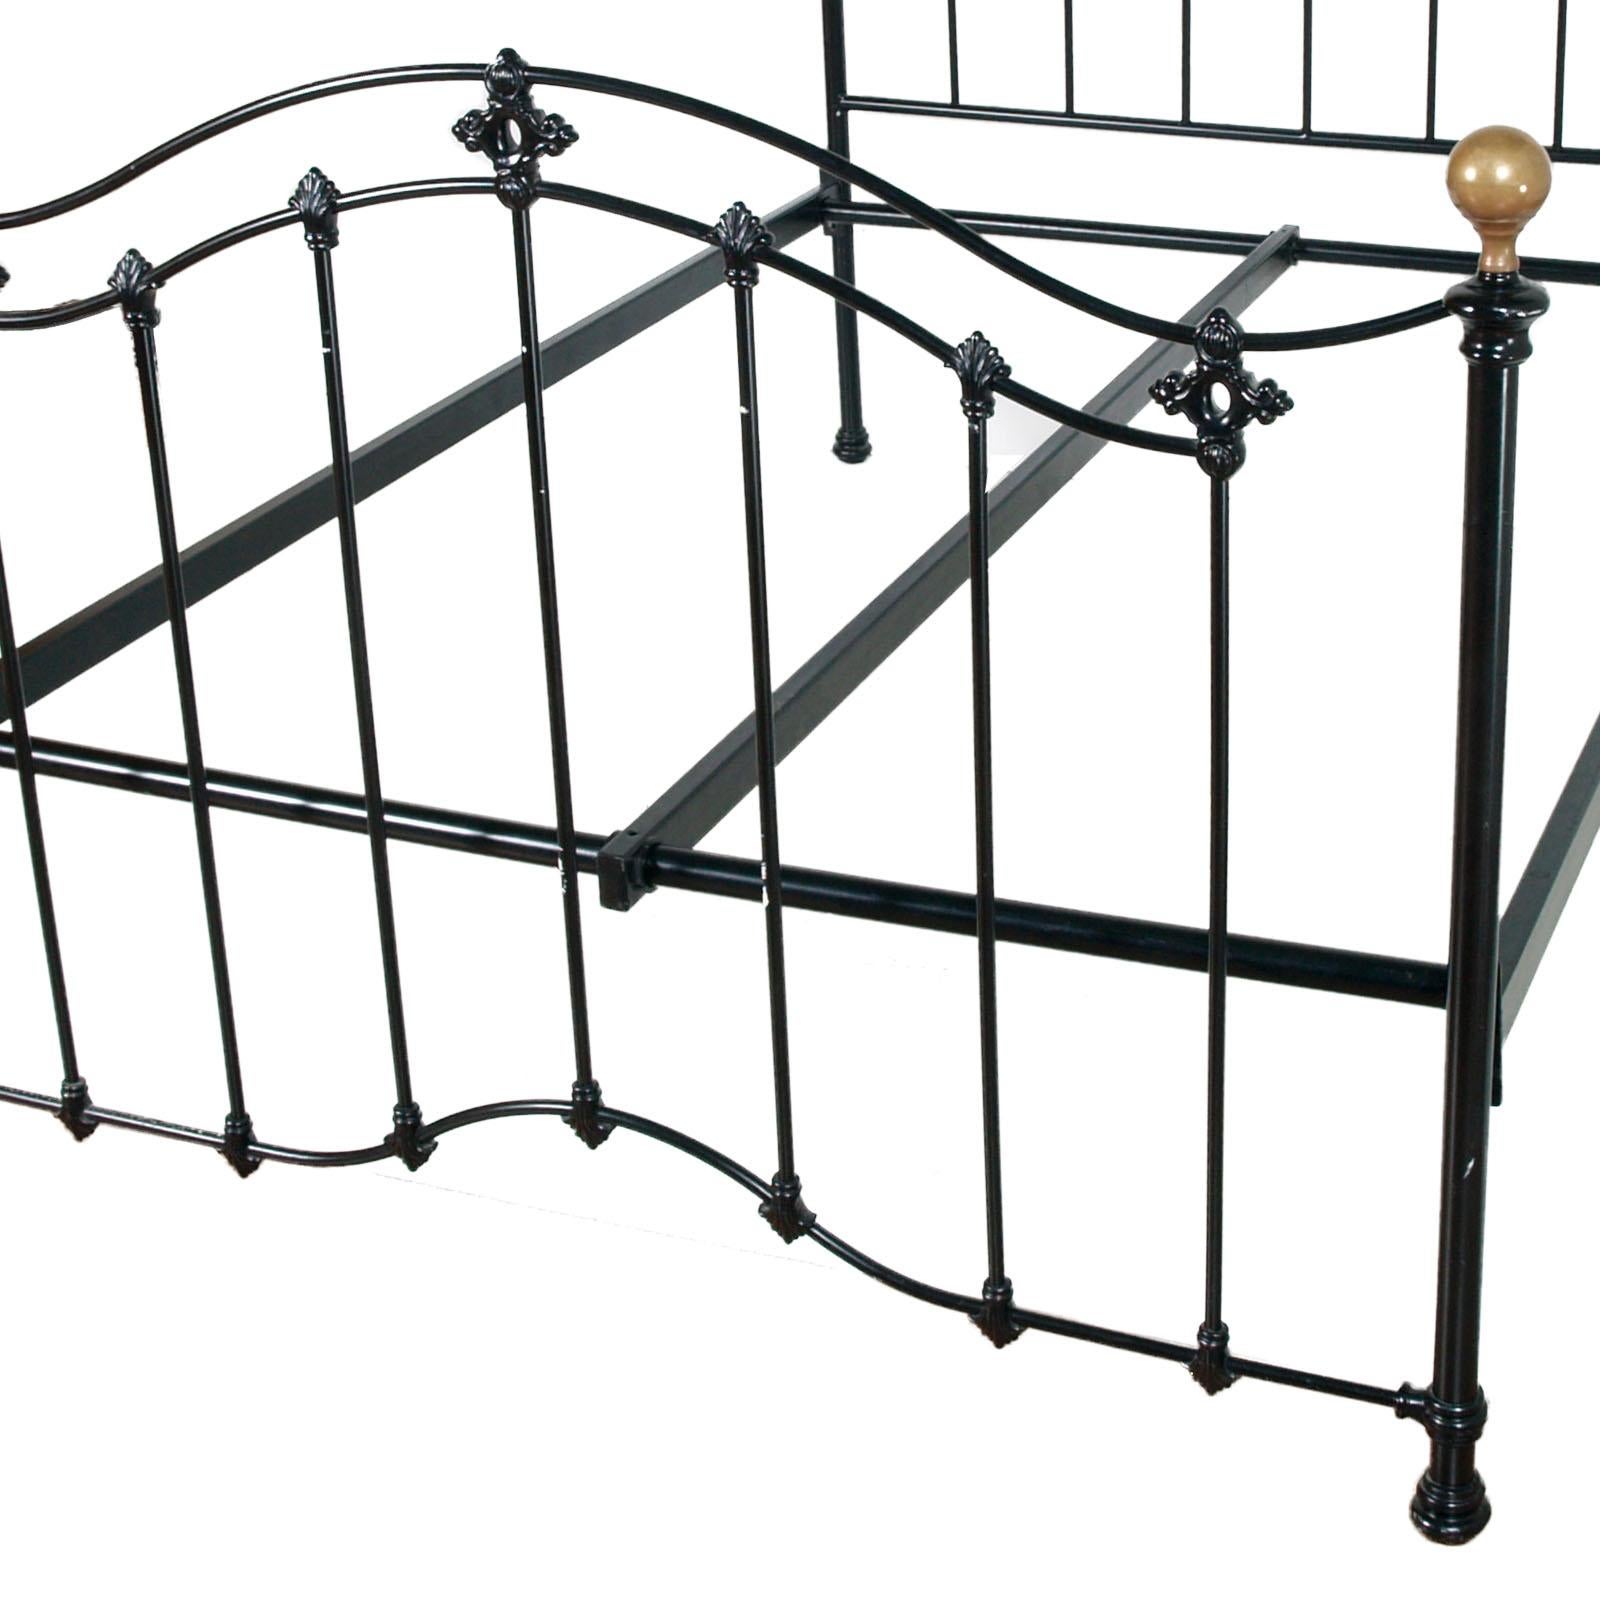 parts of a bed frame